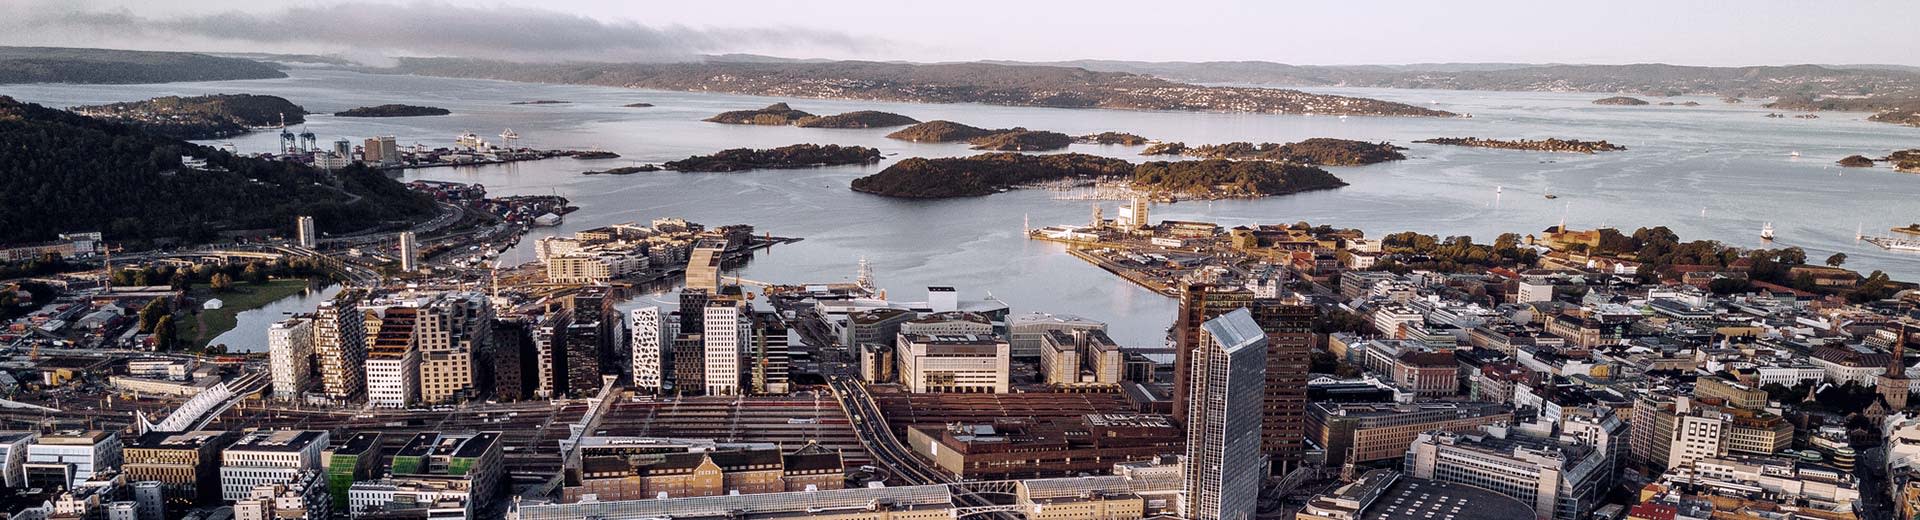 The tall buildings of Oslo overlook the coast of Norway on a cold and clear day.